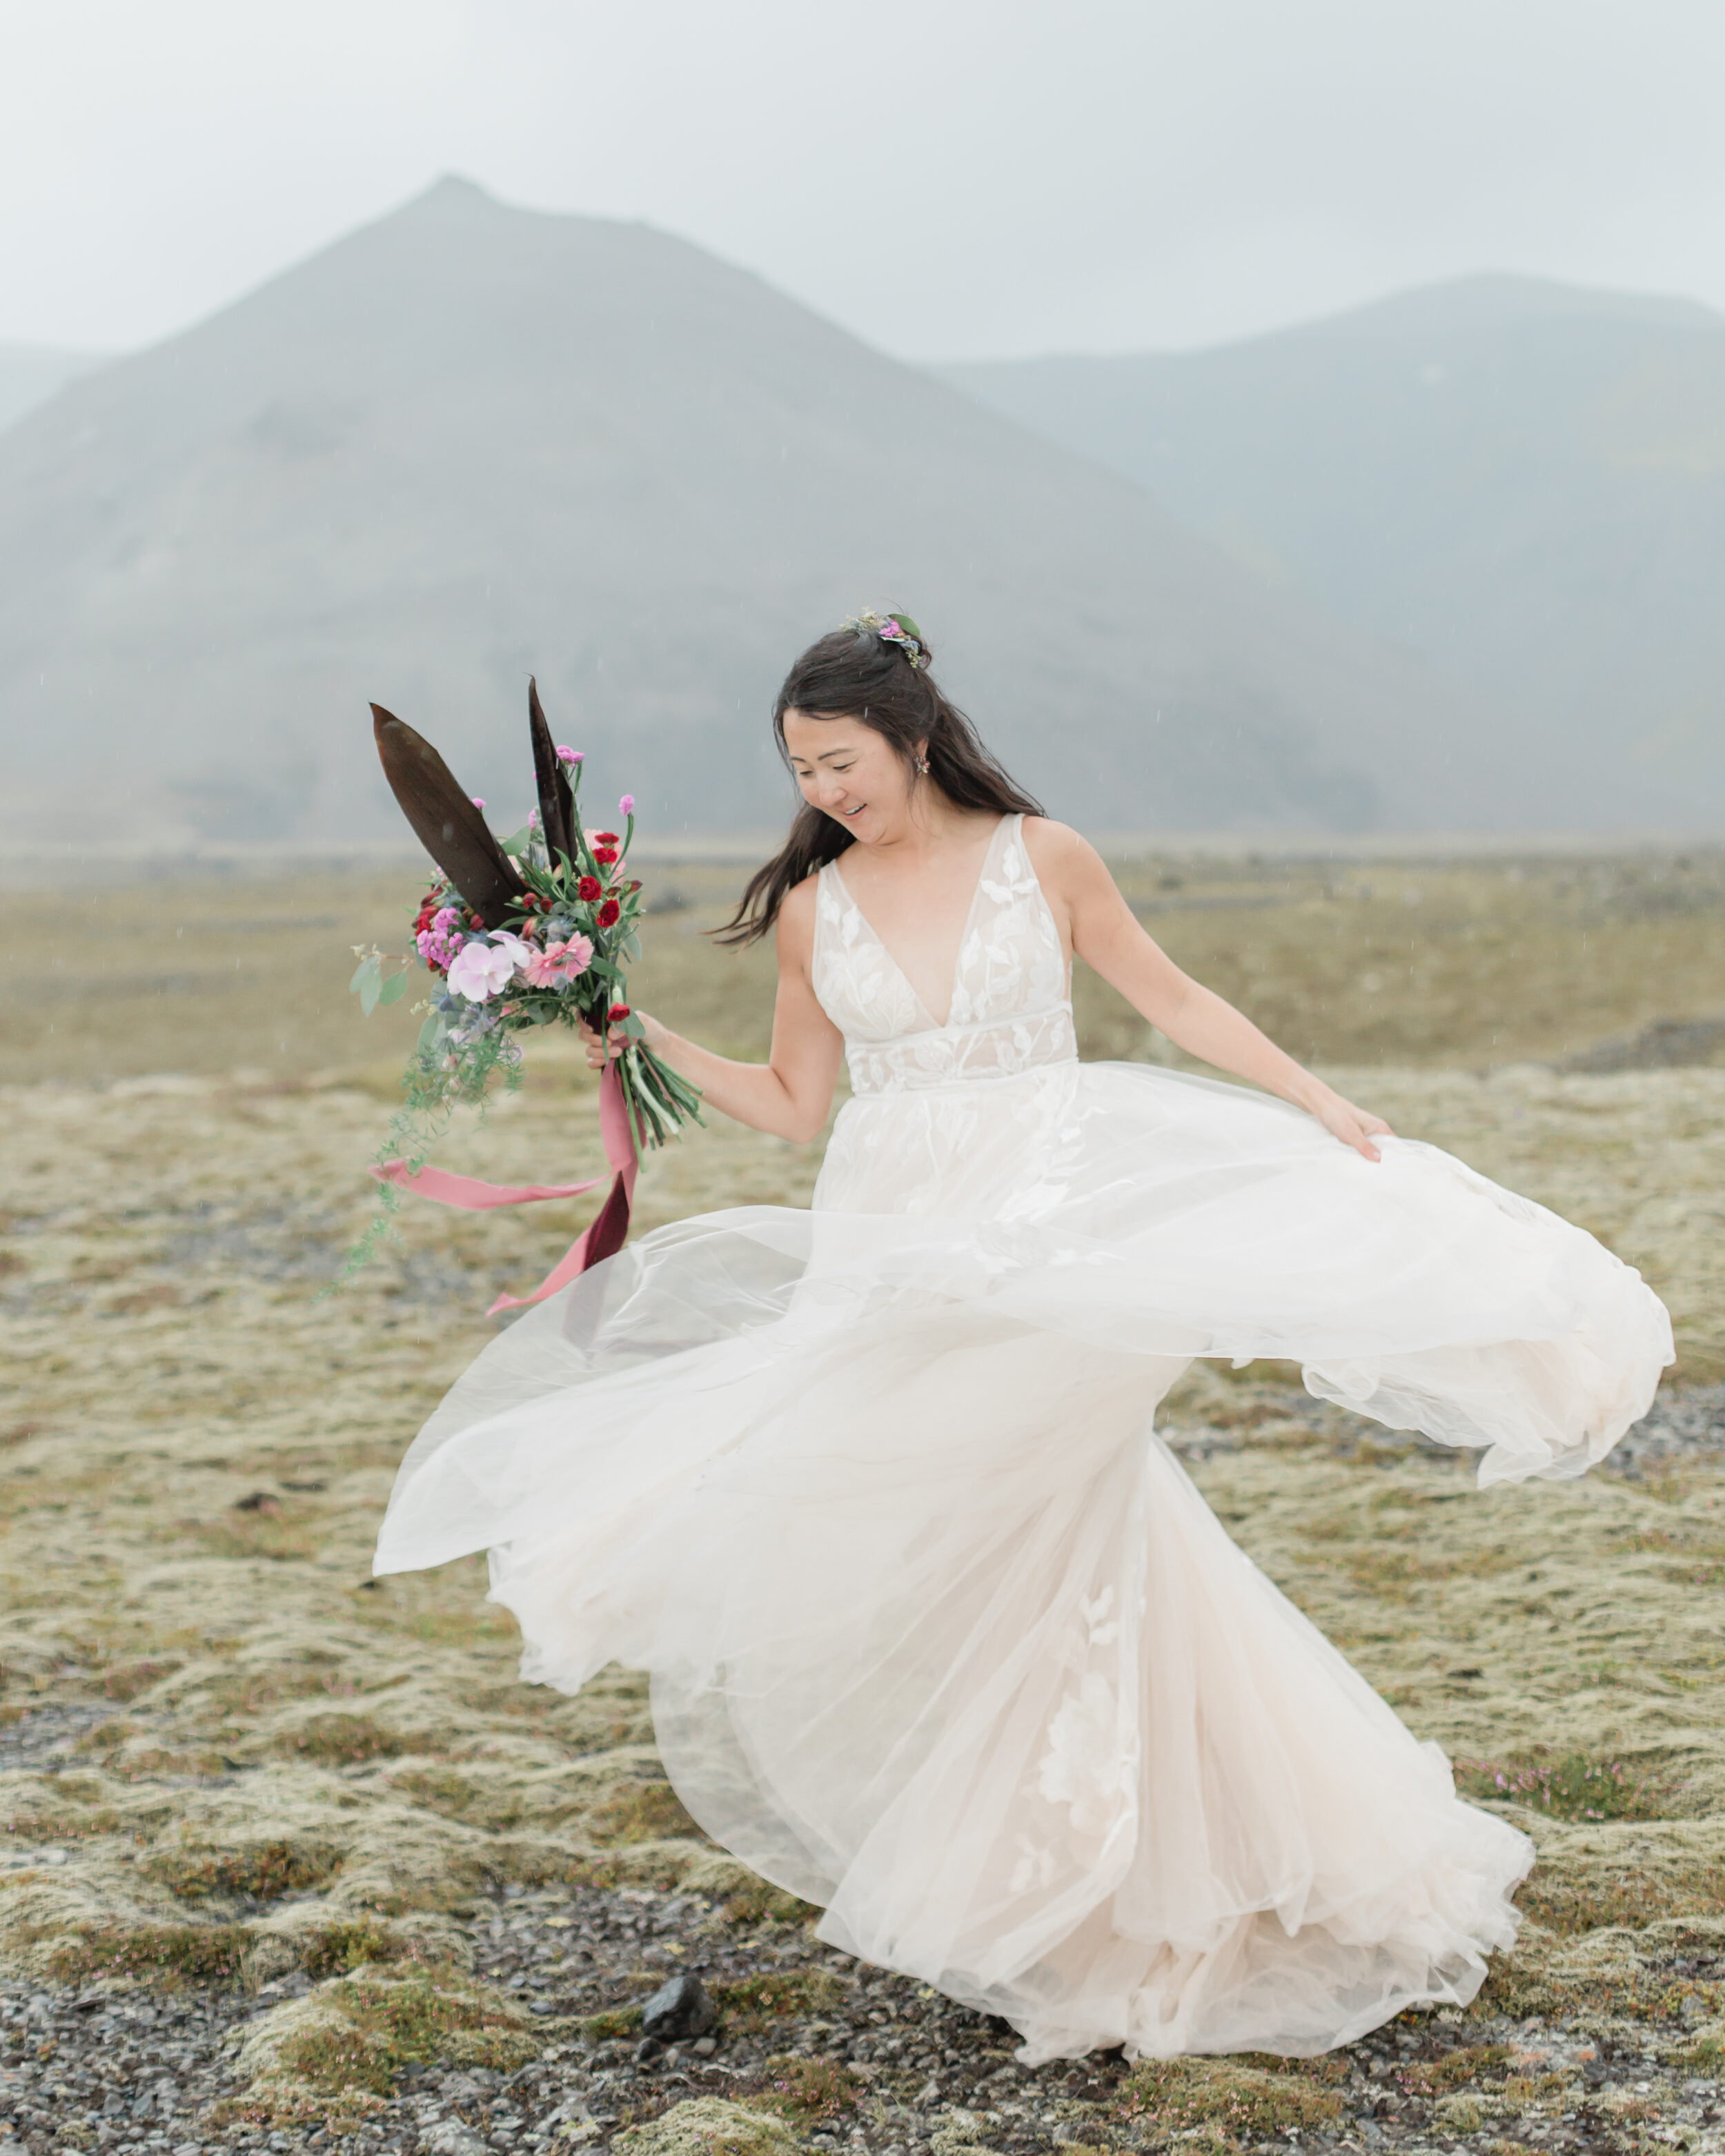 A bride shows off her wedding florals and elopement dress in Icelanad.